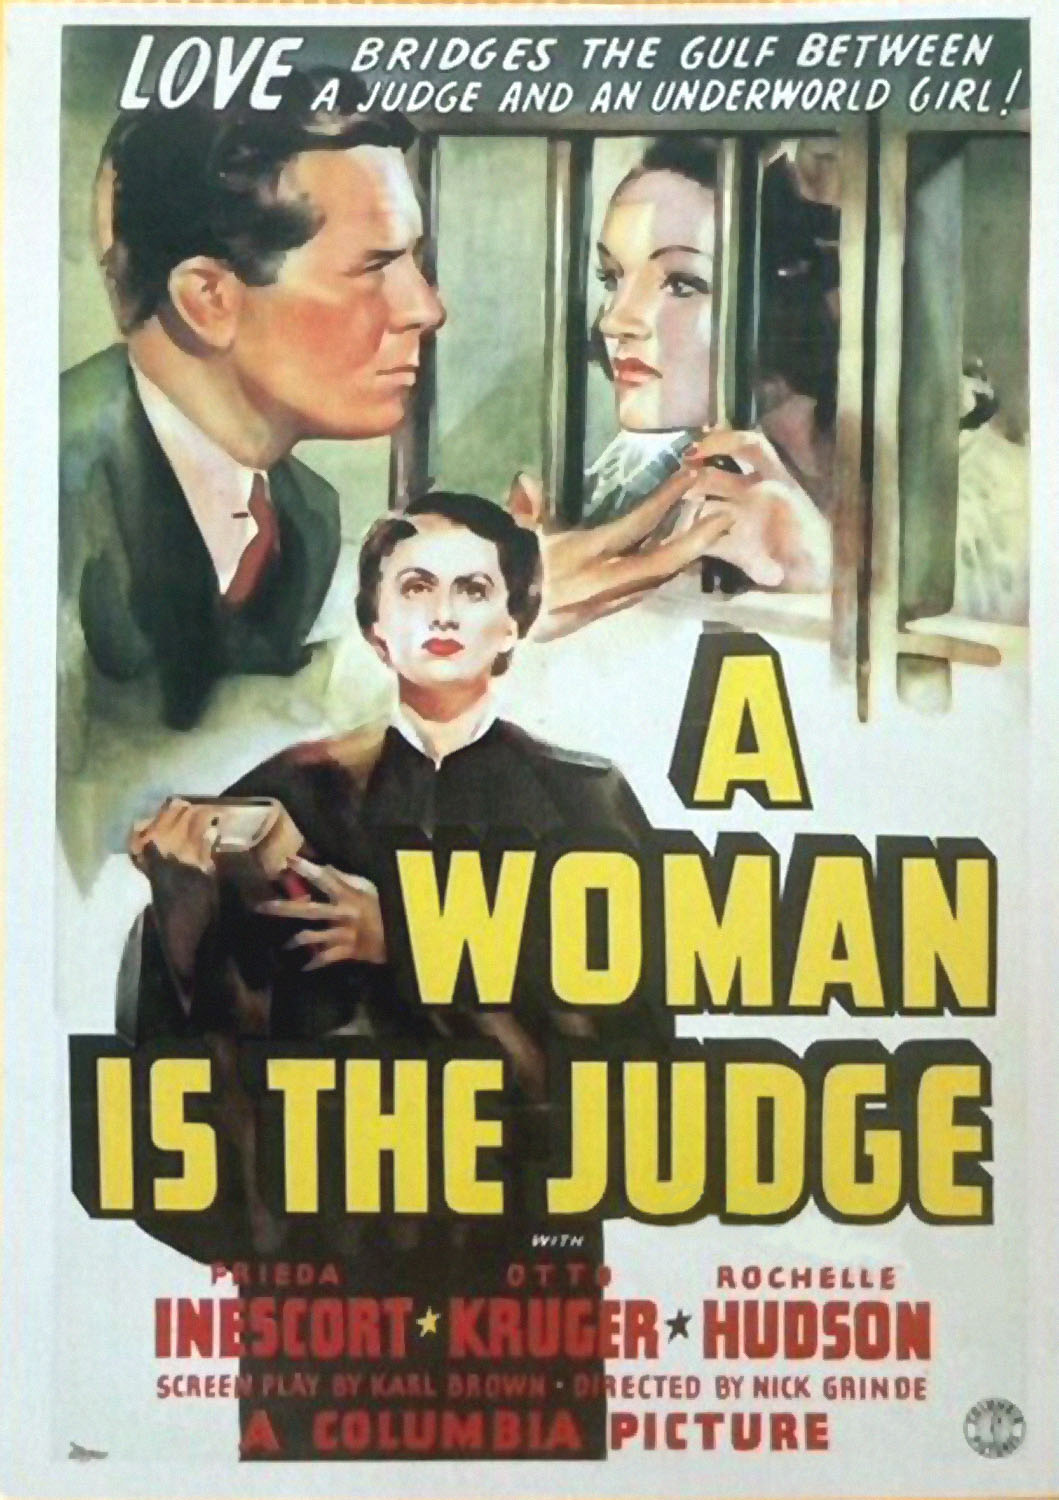 WOMAN IS THE JUDGE